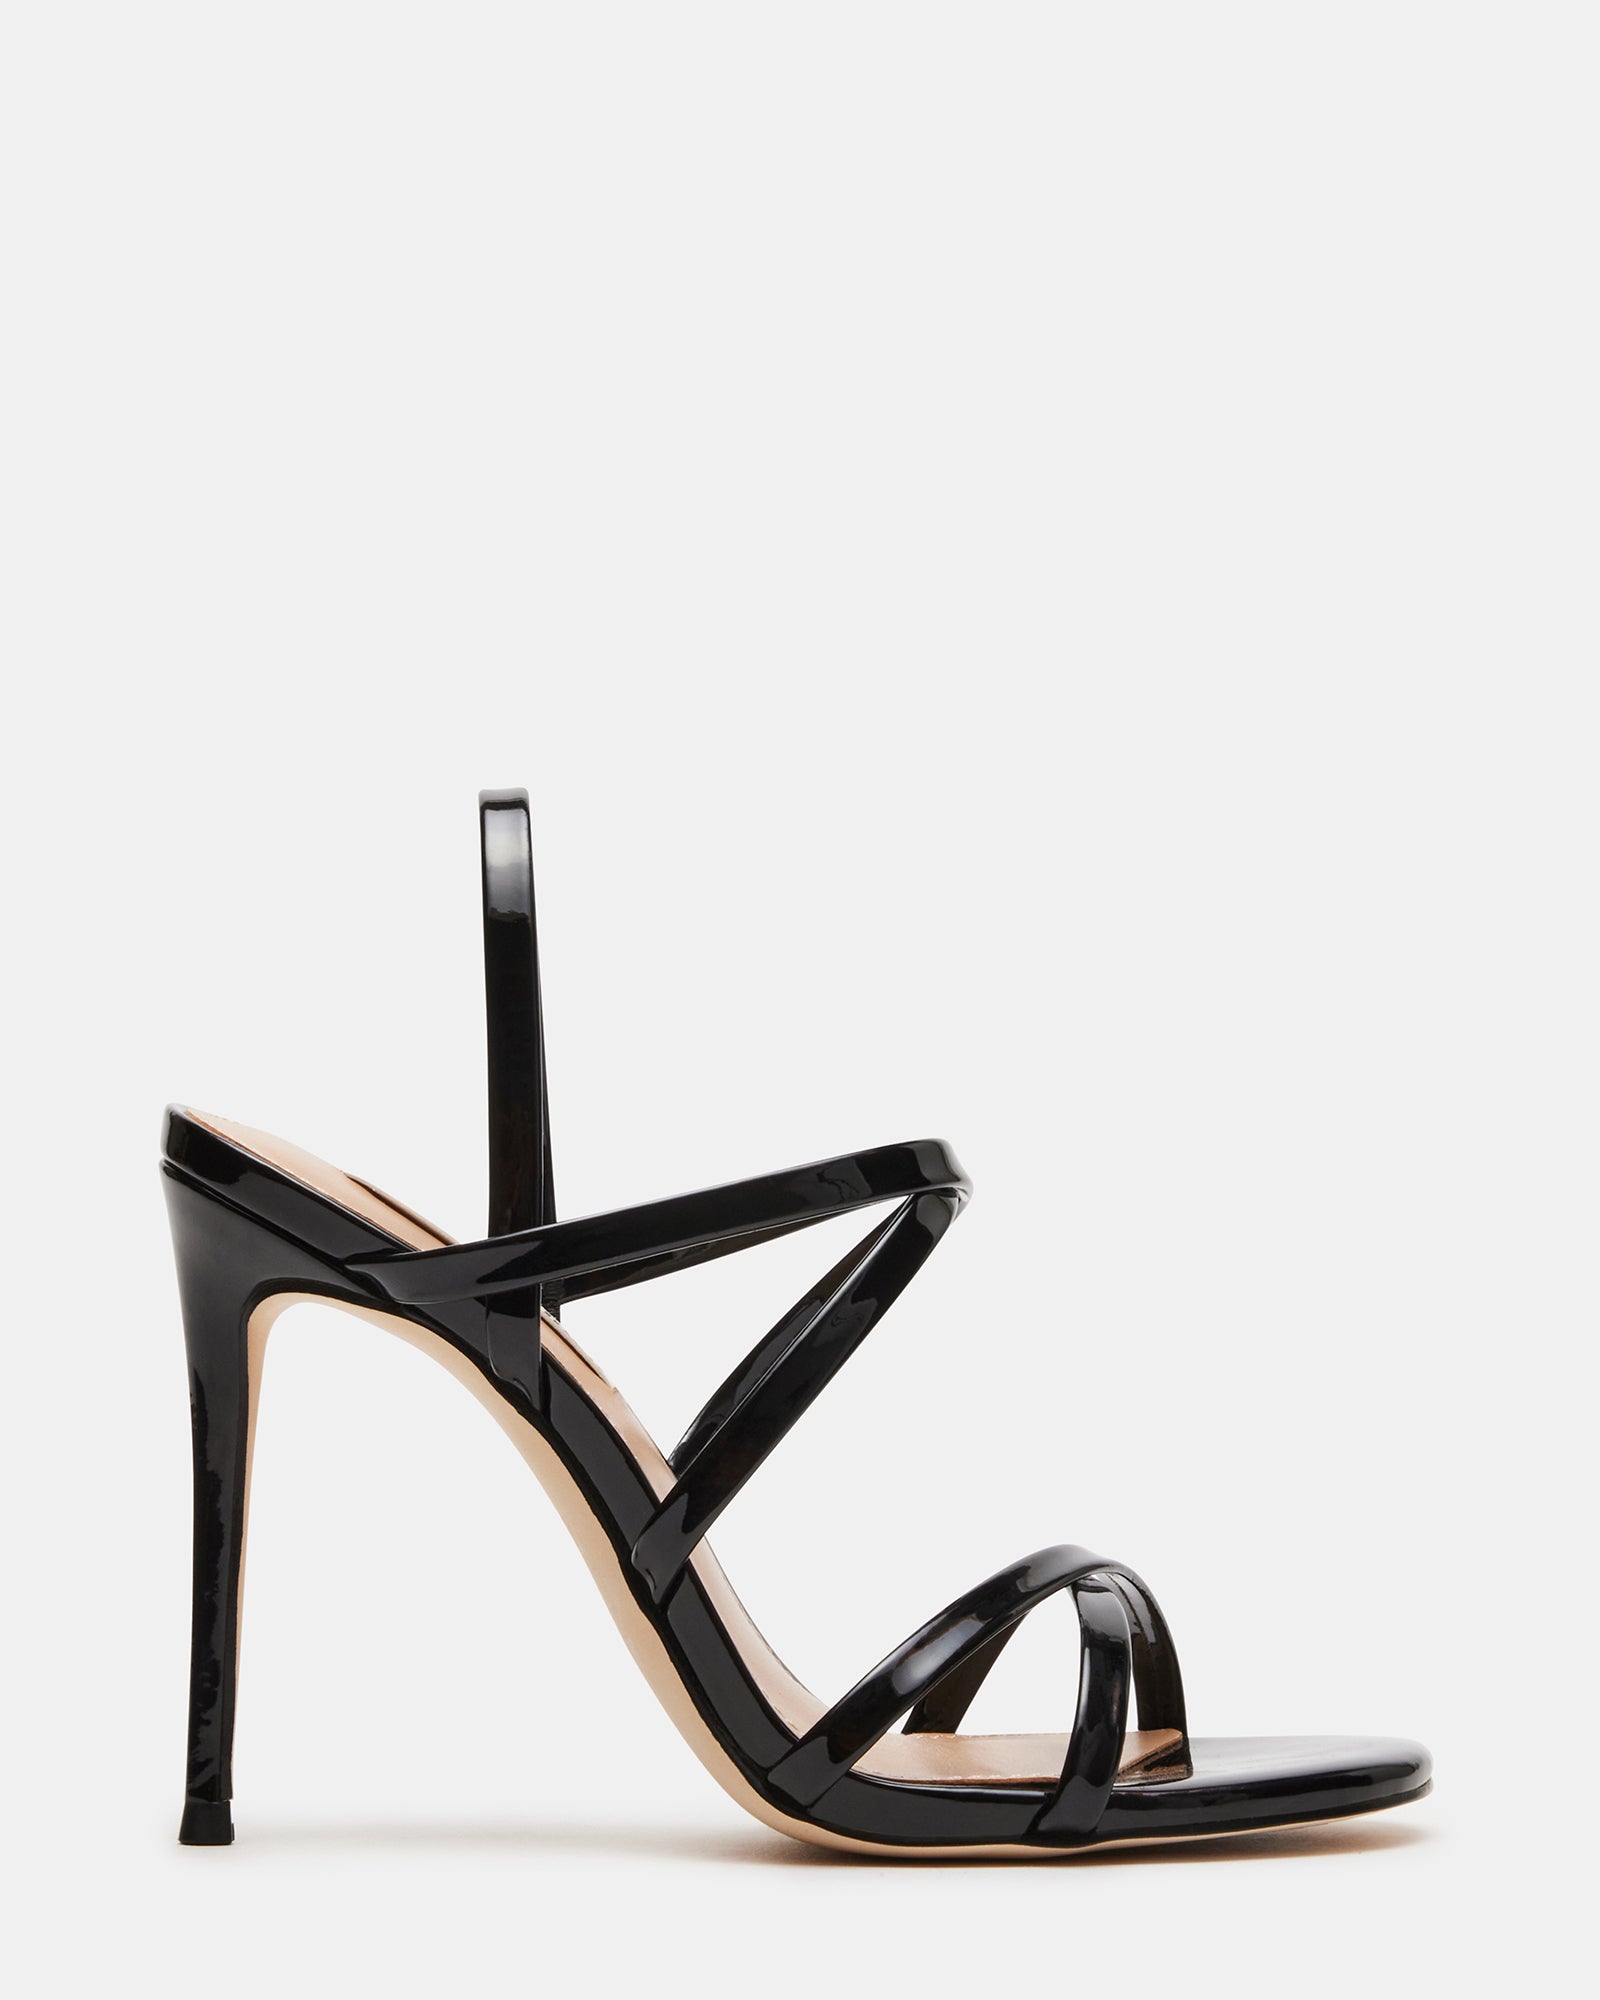 The black strappy heels | Street Style Store | SSS